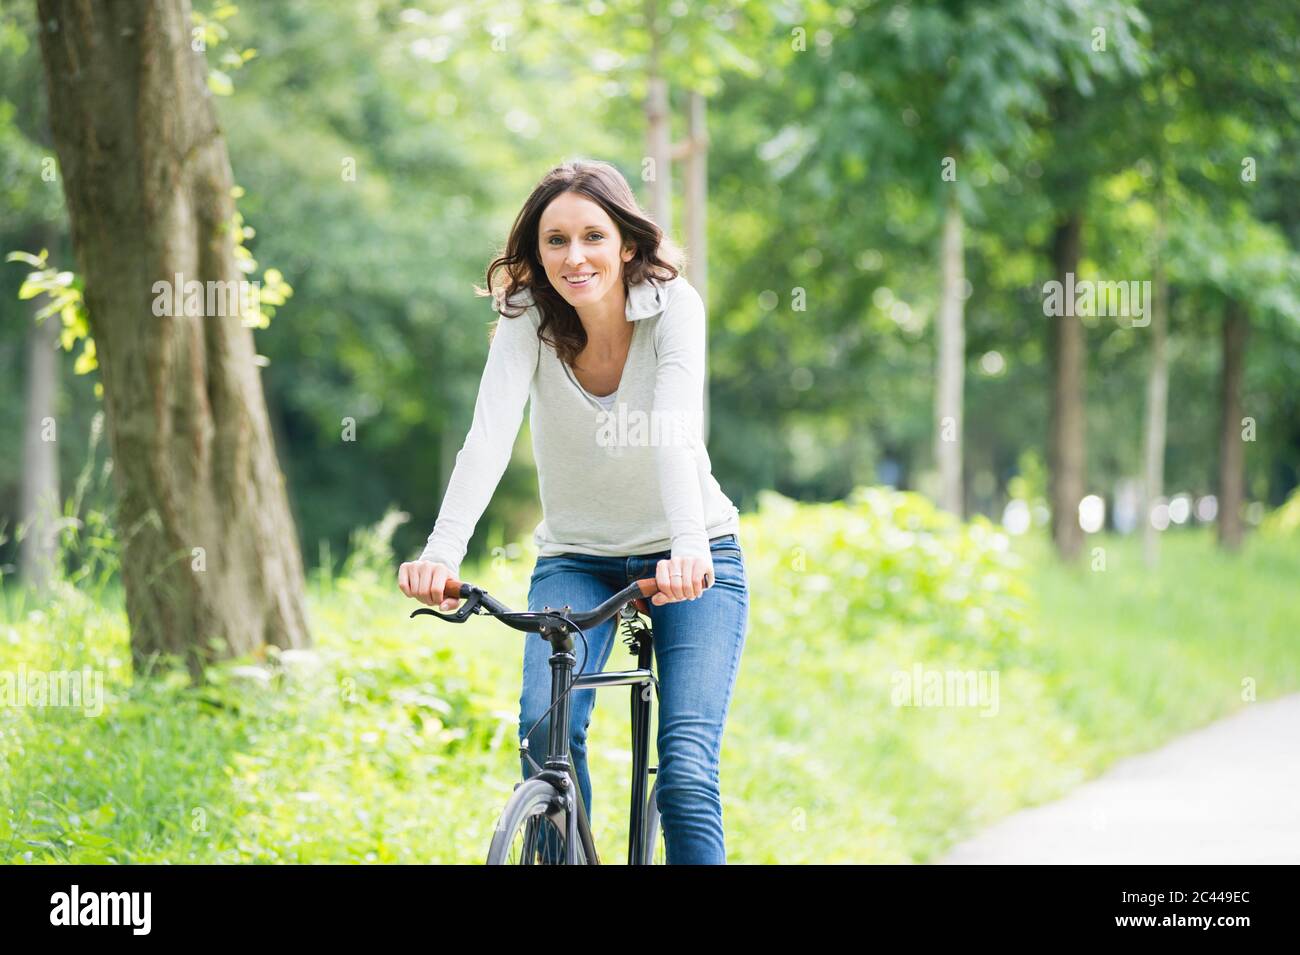 Happy young woman cycling against trees at park Stock Photo